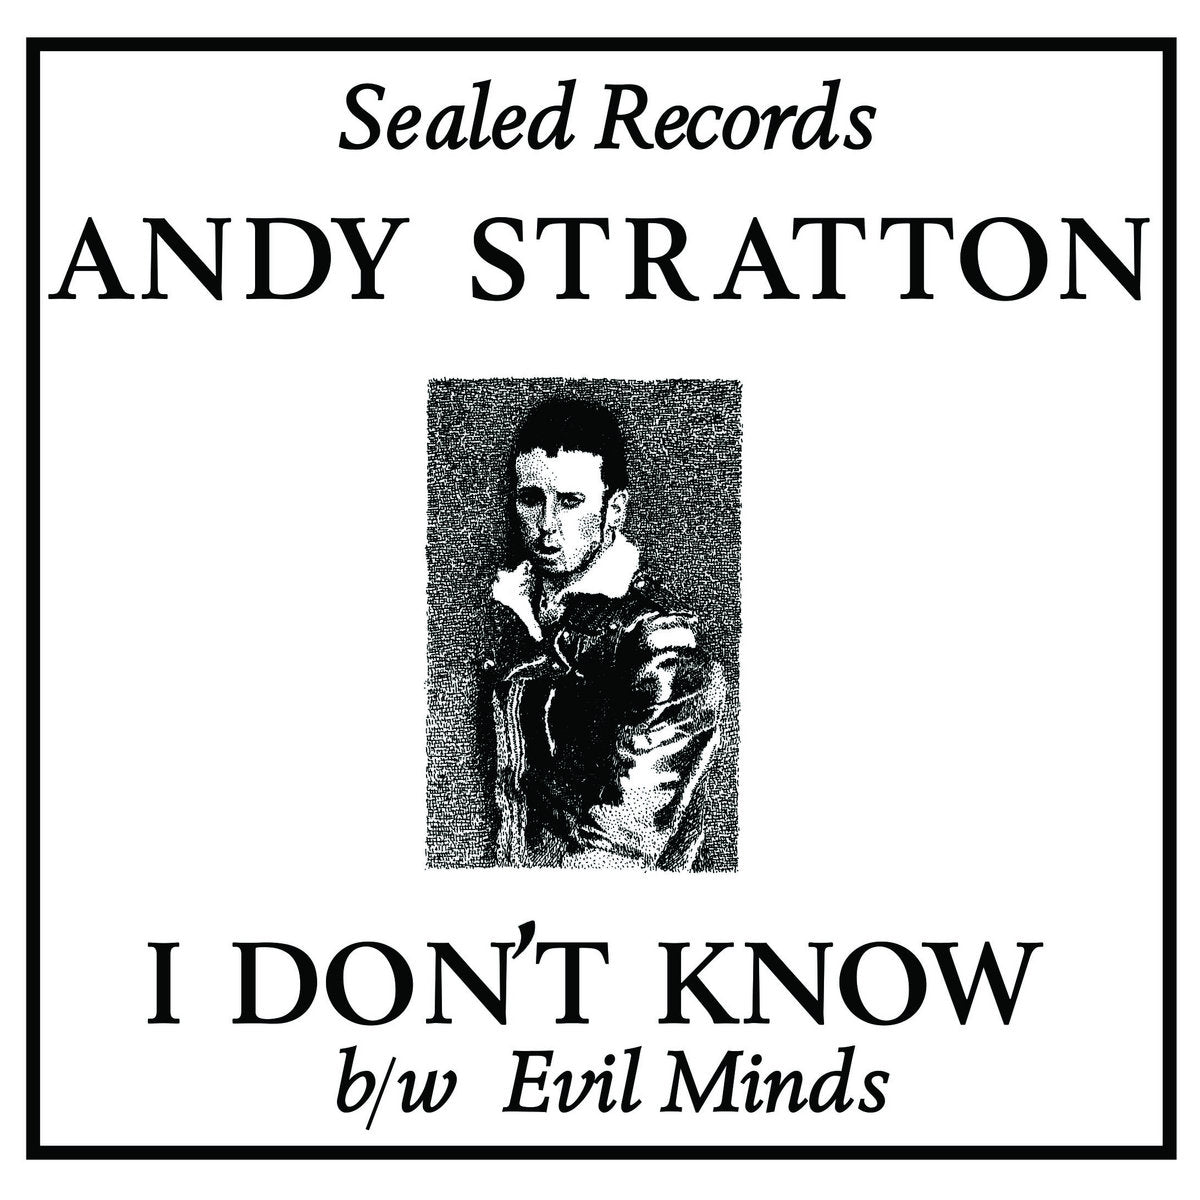 ANDY STRATTON - I DON'T KNOW Vinyl 7"